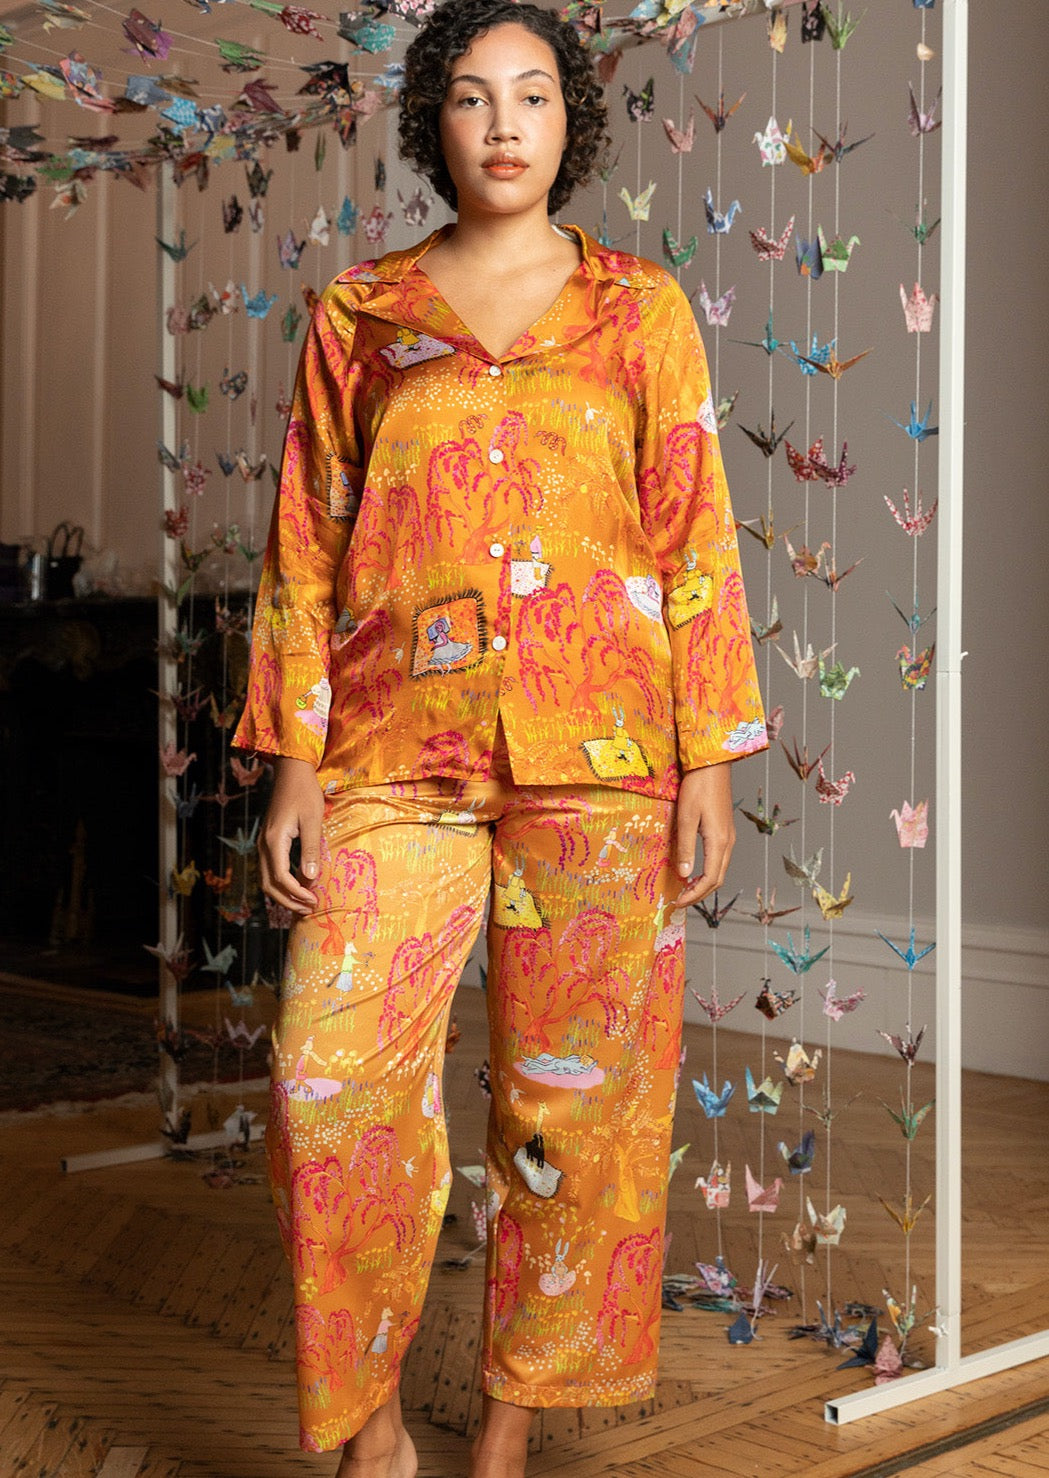 Relax into angelically soft viscose, printed in our SS22 Whiskey Business print. Happily suited animals relax, dance, and situate amongst frabjously fuchsia willow trees-- a guaranteed mood lift.